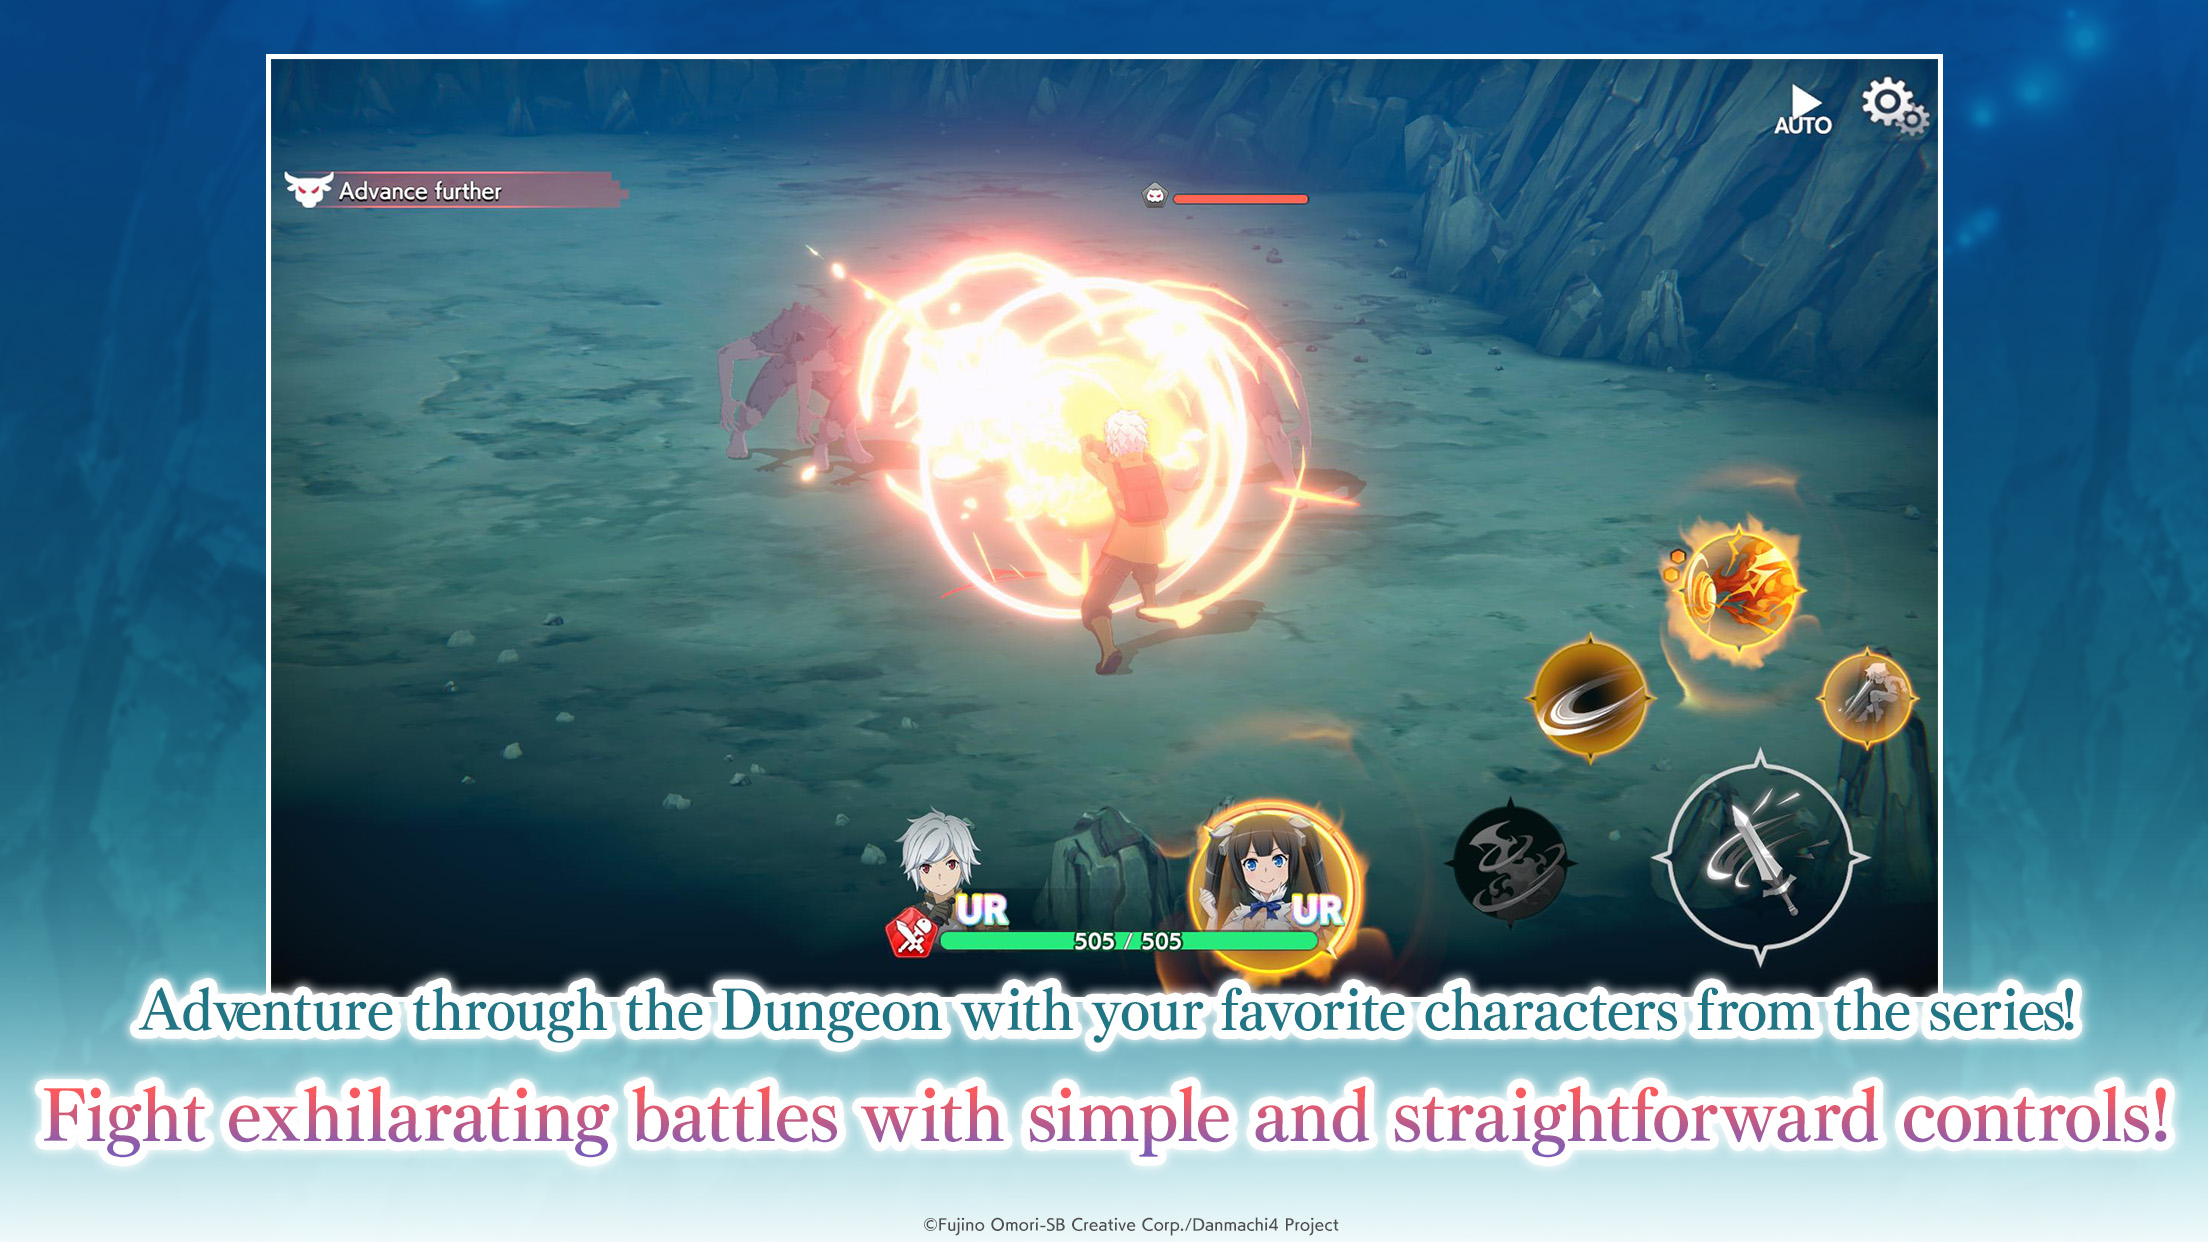 DanMachi BATTLE CHRONICLE' Game Released Today